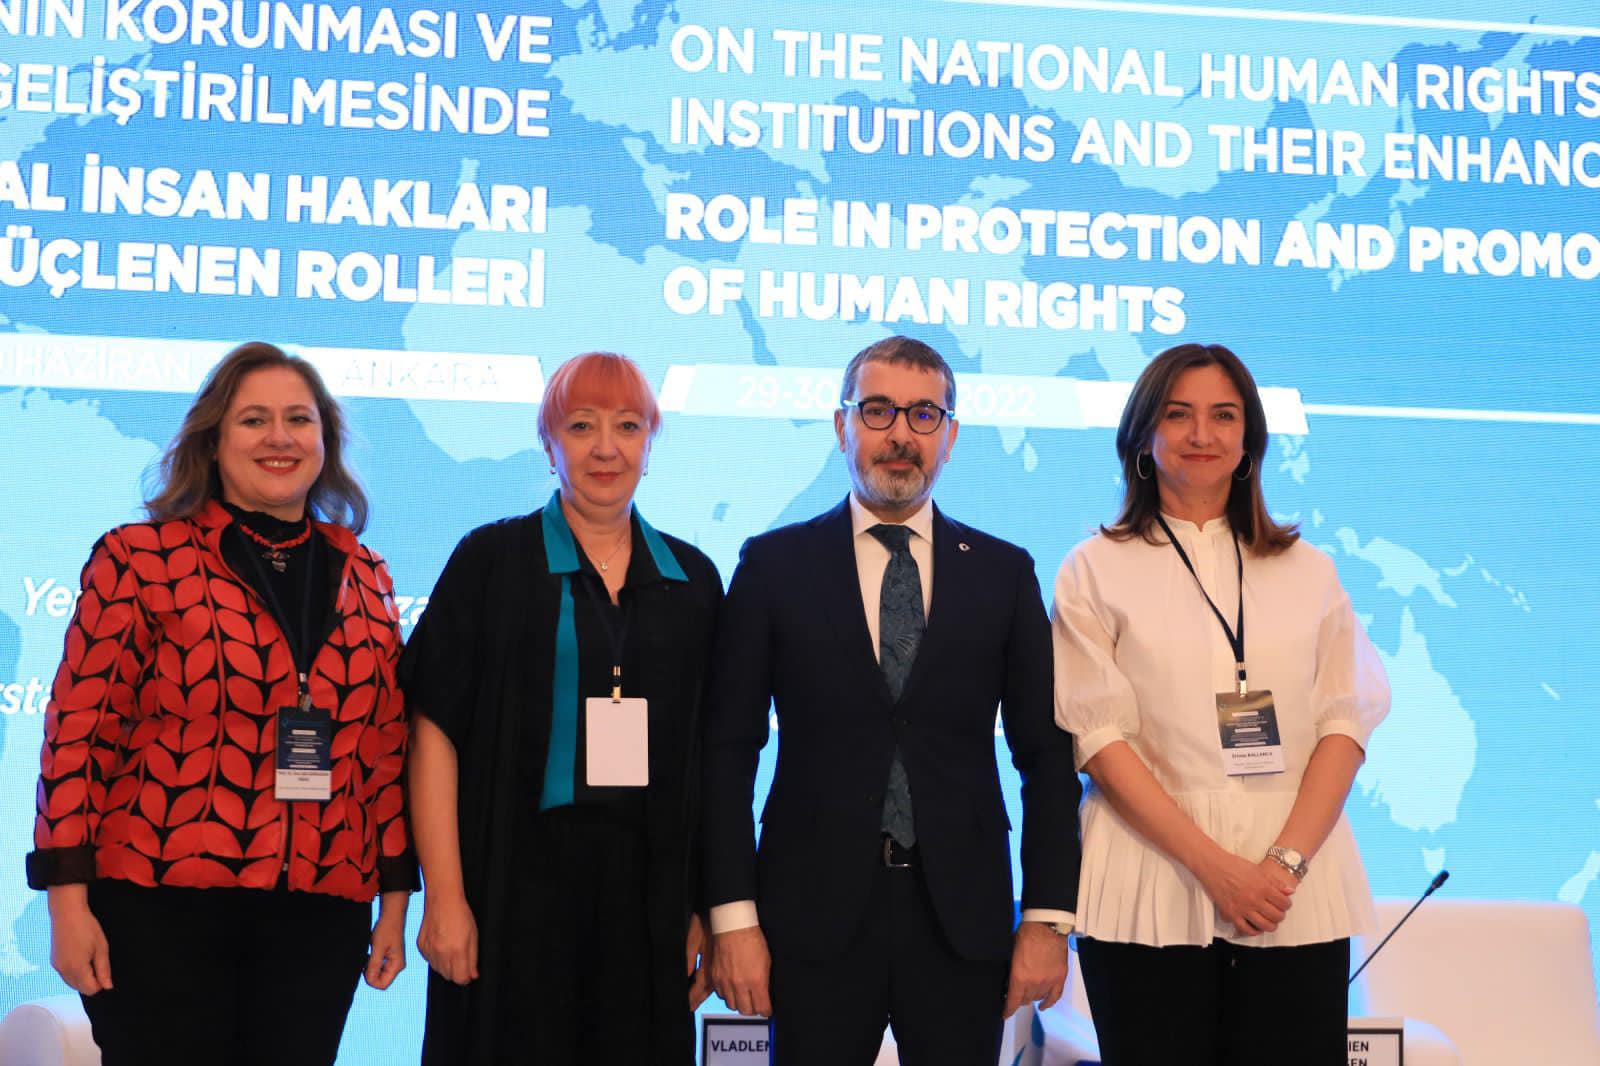 The International Summit on the National Human Rights Institutions, was organized from 29-30 June 2022 in Ankara Turkey.